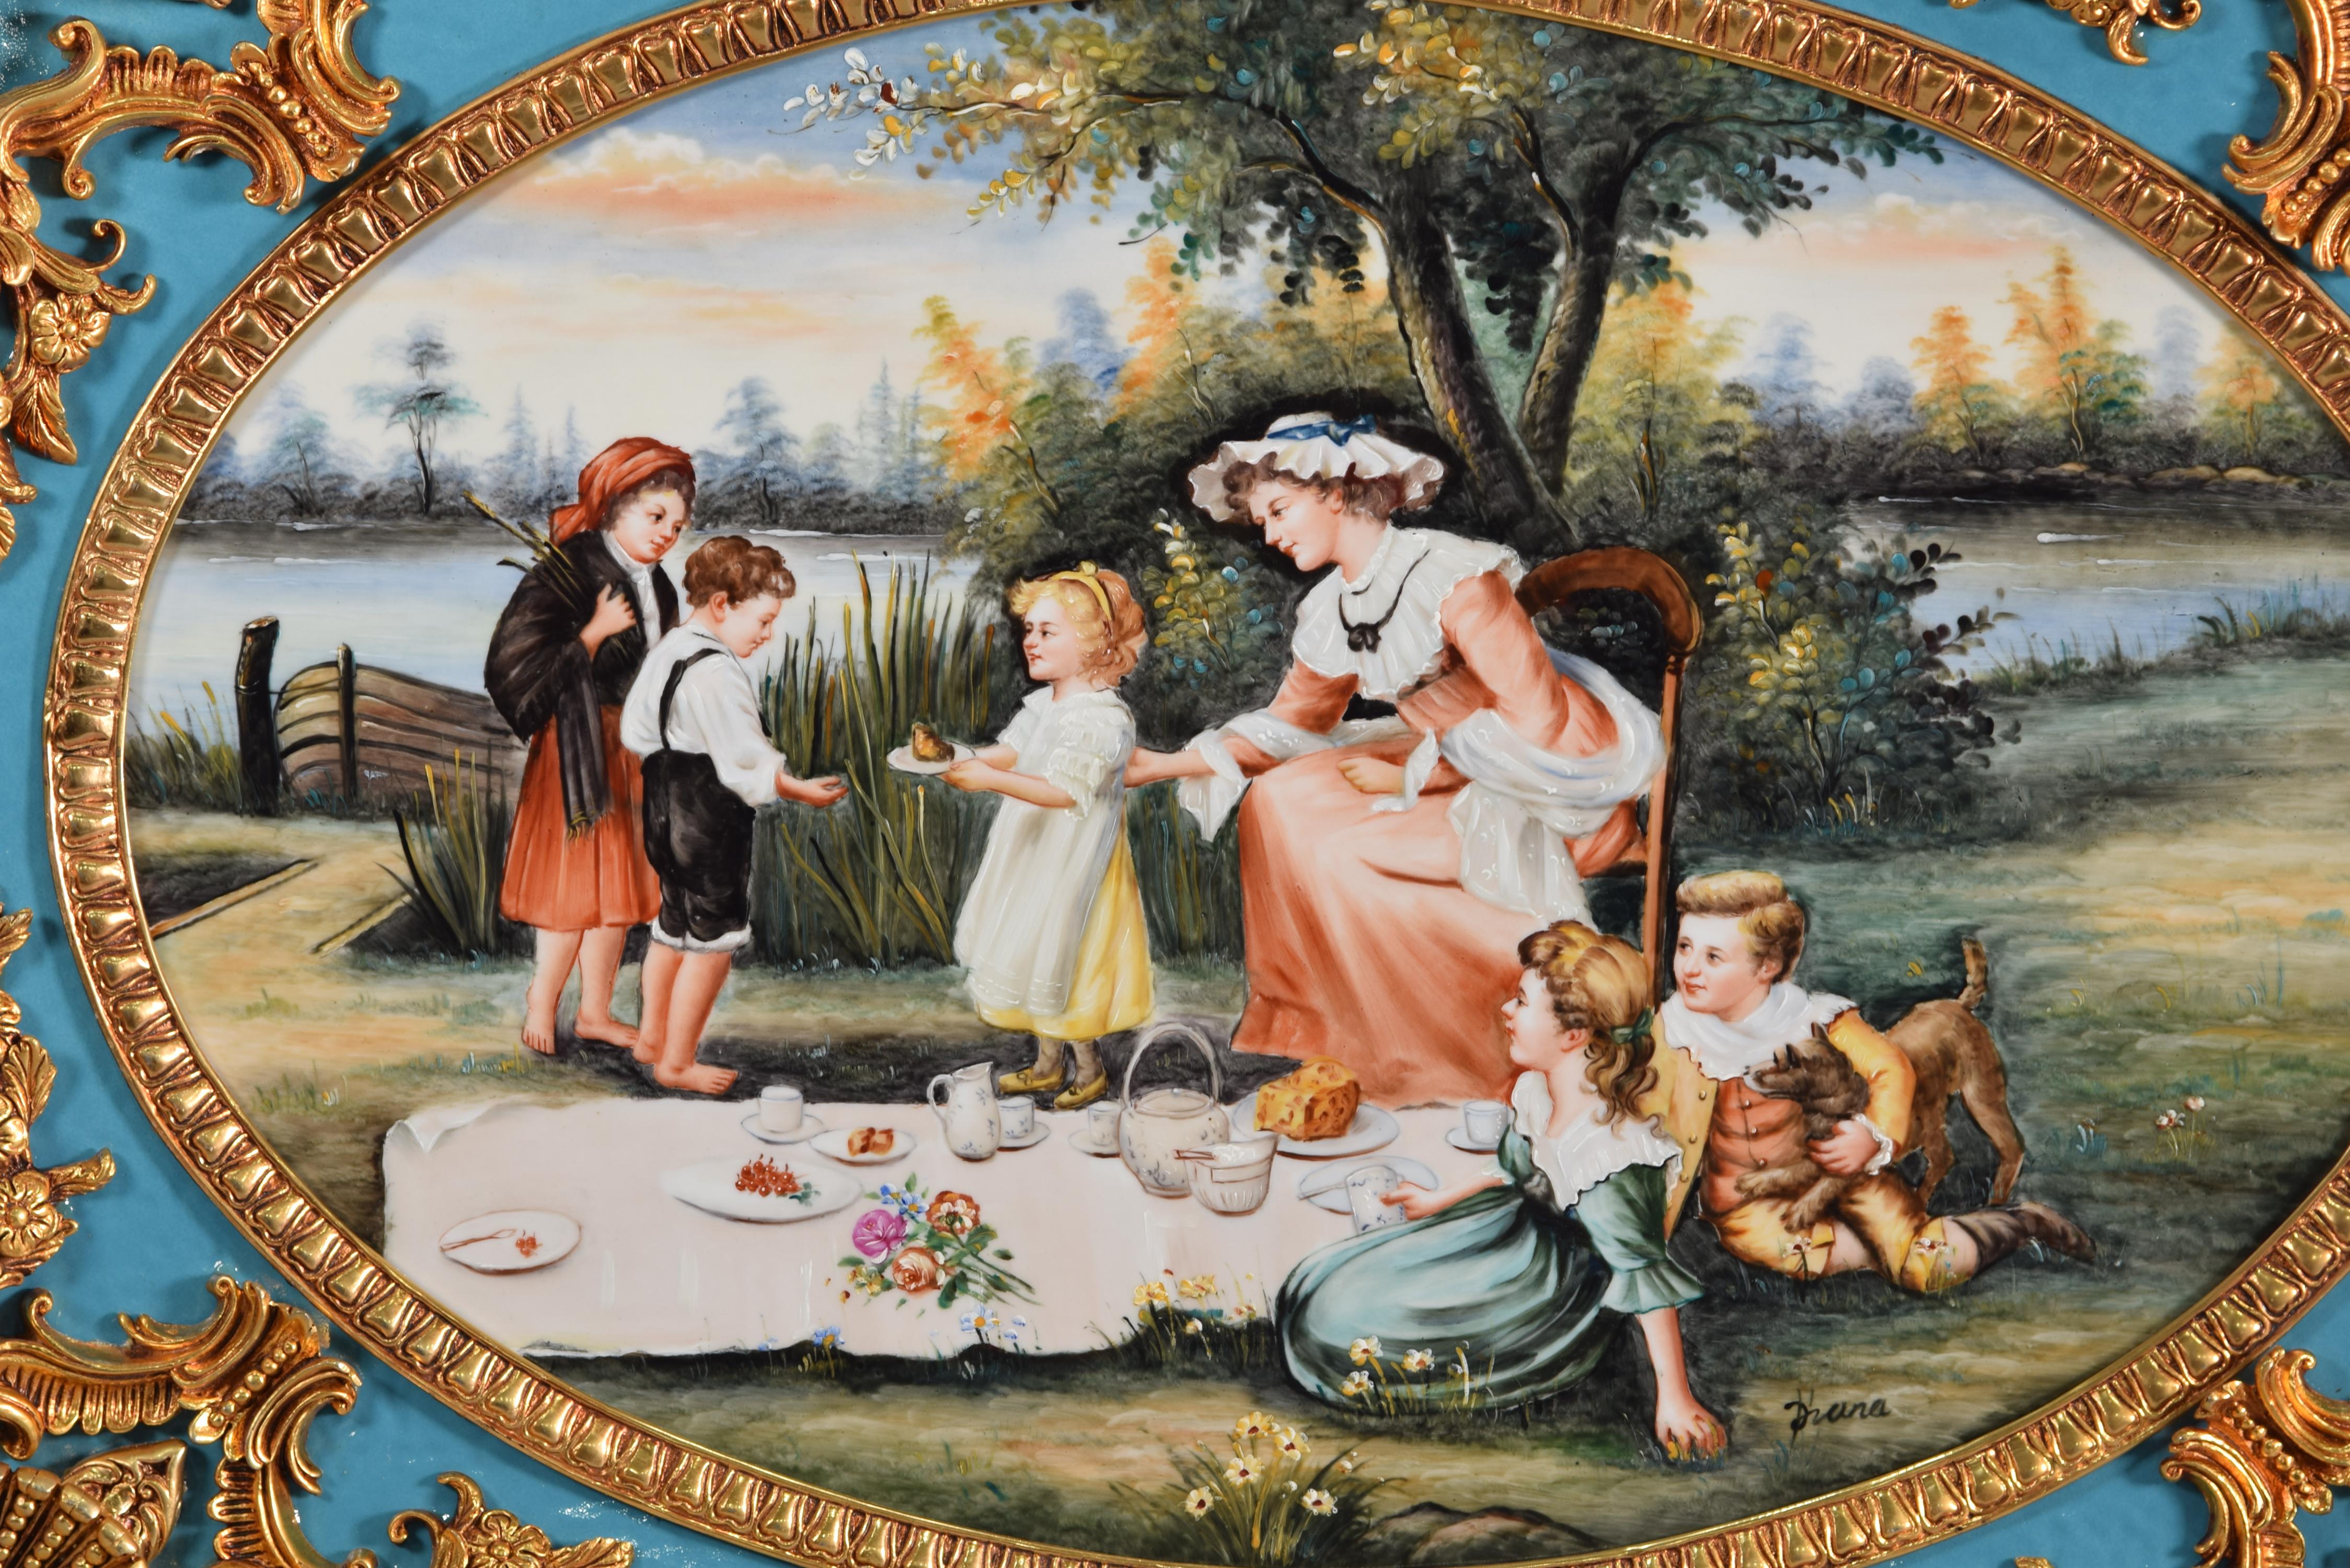 Country scene. Oil on porcelain. 
 A country scene has been painted in oil on a porcelain plate, enhanced with a frame decorated with elements of classicist influence common in 19th century European art. The scene shows a woman with three children